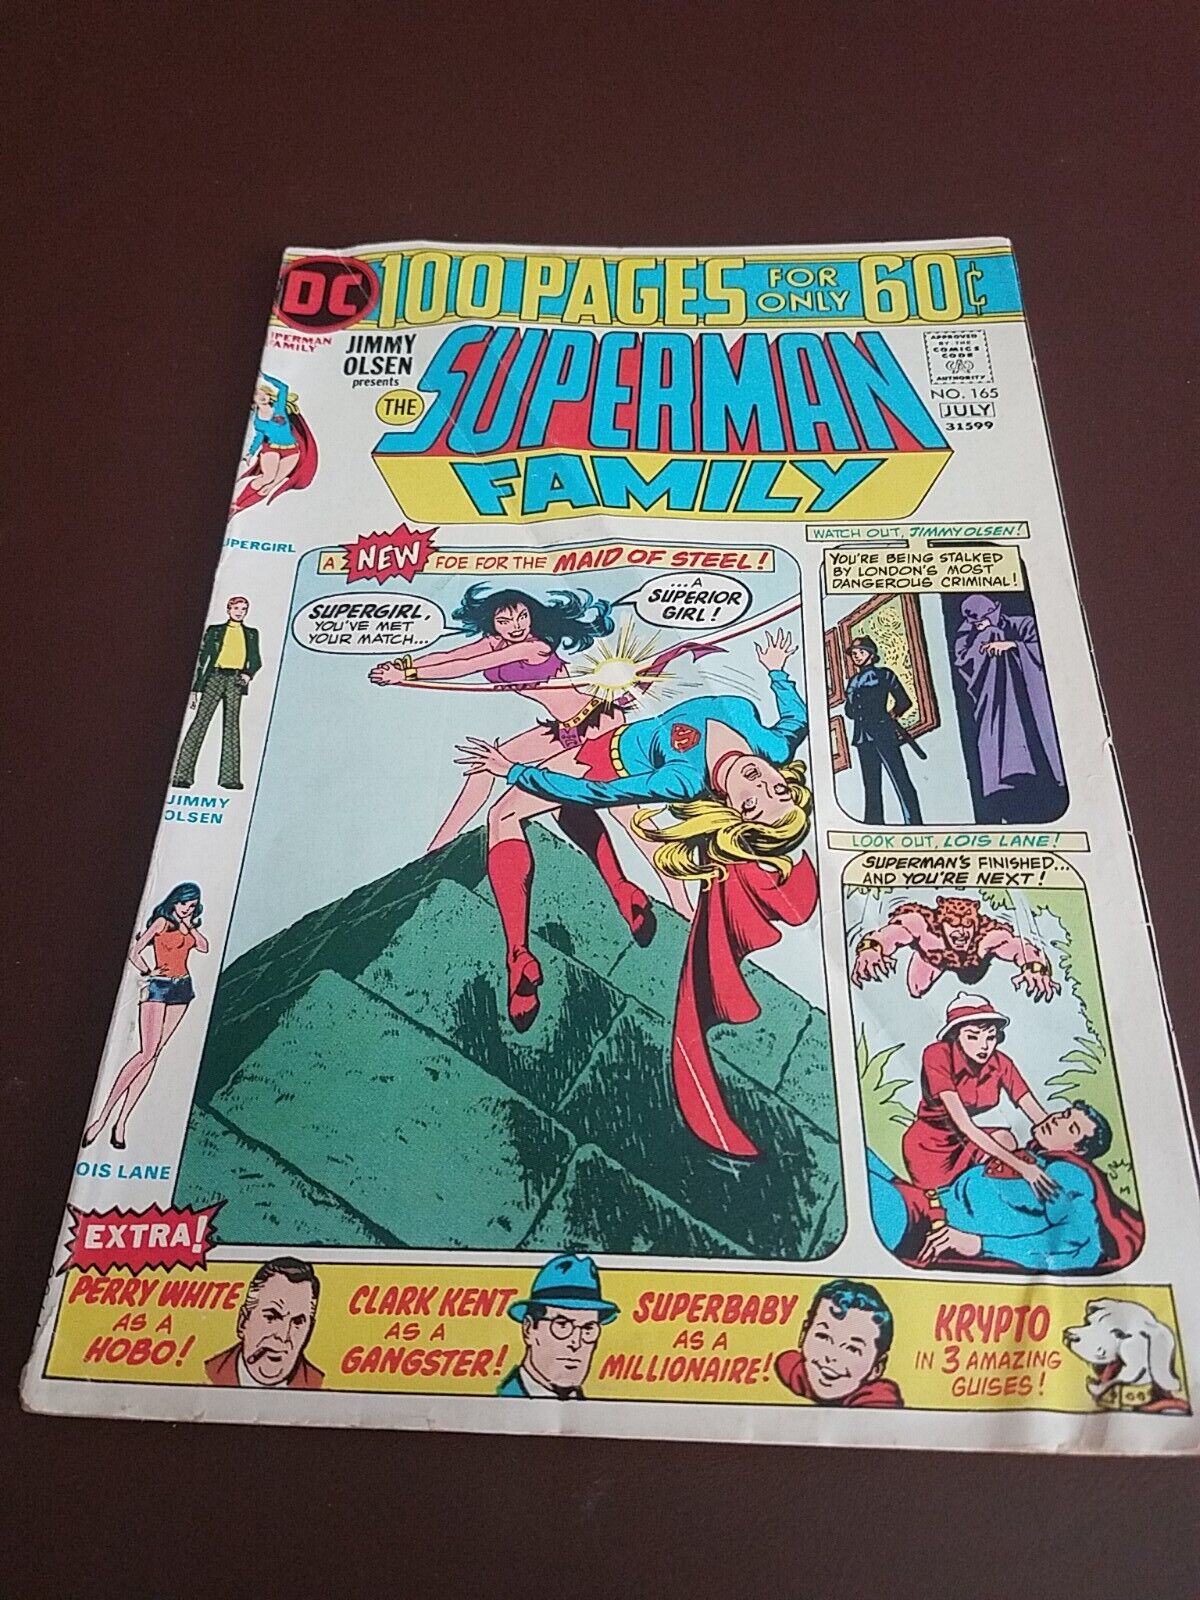 Superman Family #165 1974 DC F/VG- 3.5 100 PAGES Supergirl Cover & Appearance